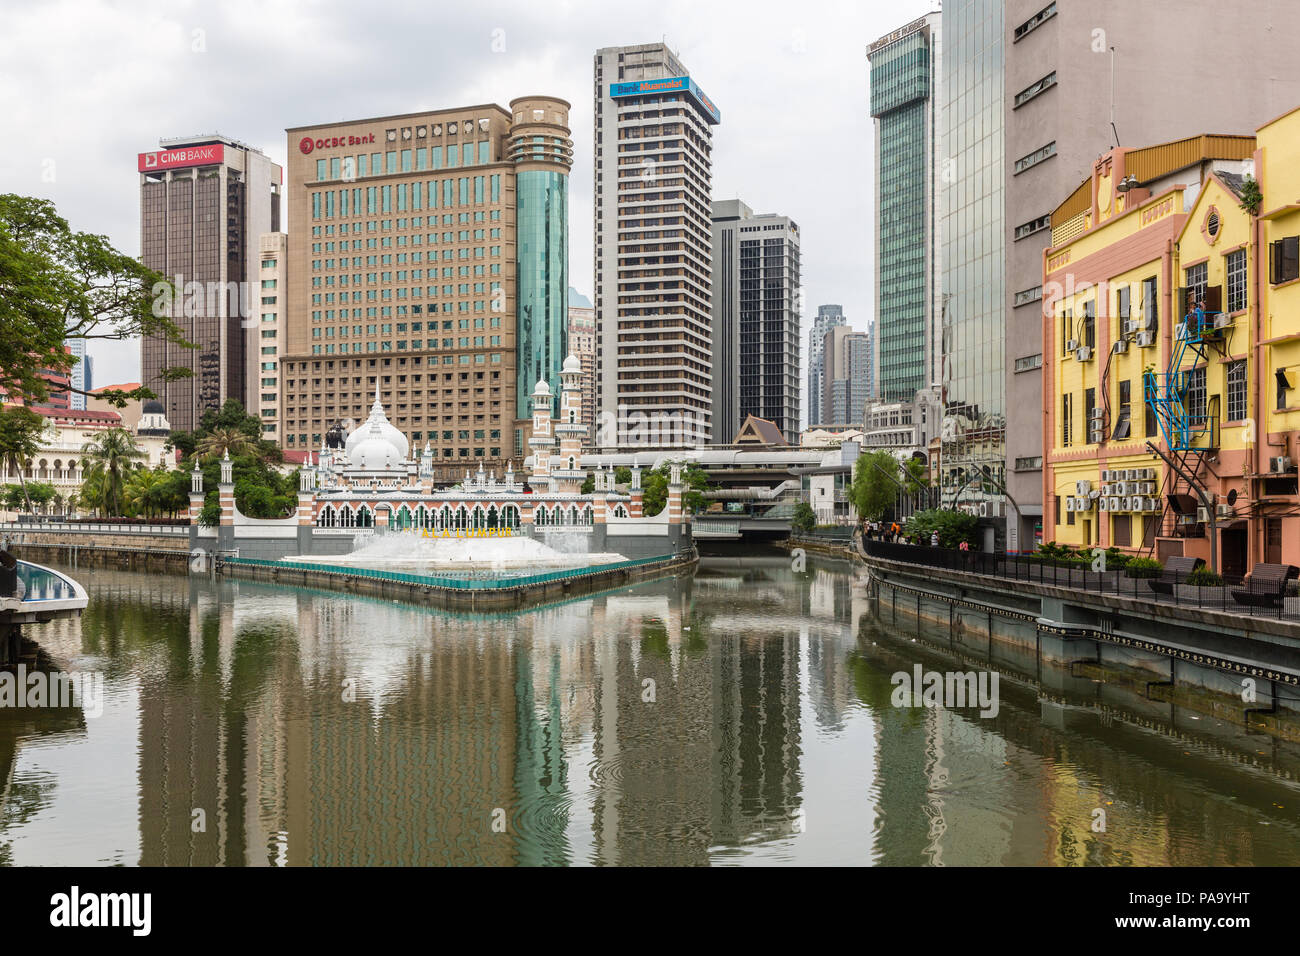 Masjid Jamek Sultan Abdul Samad mosque seen at the confluence of two rivers, surrounded by buildings of various ages.  Kuala Lumpur, Malaysia Stock Photo